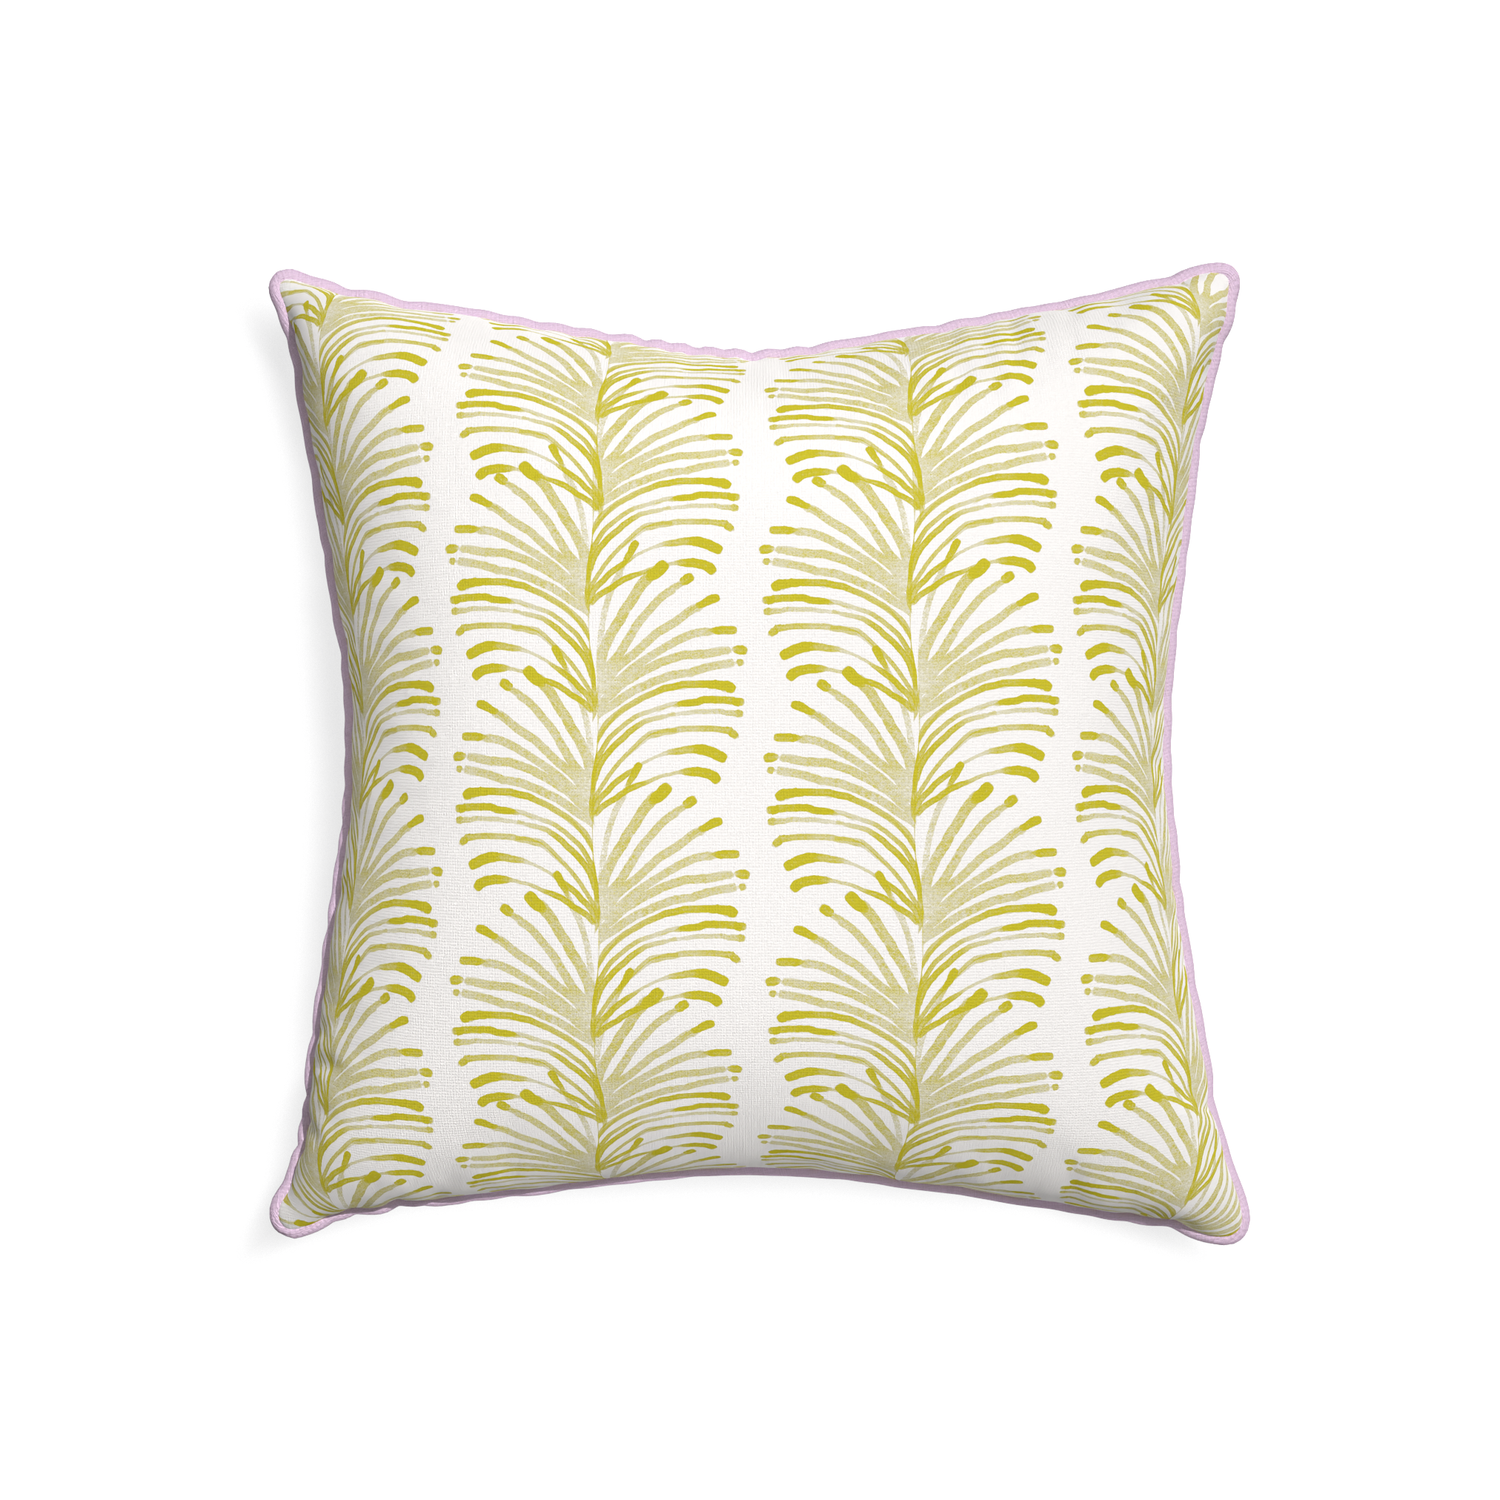 22-square emma chartreuse custom yellow stripe chartreusepillow with l piping on white background